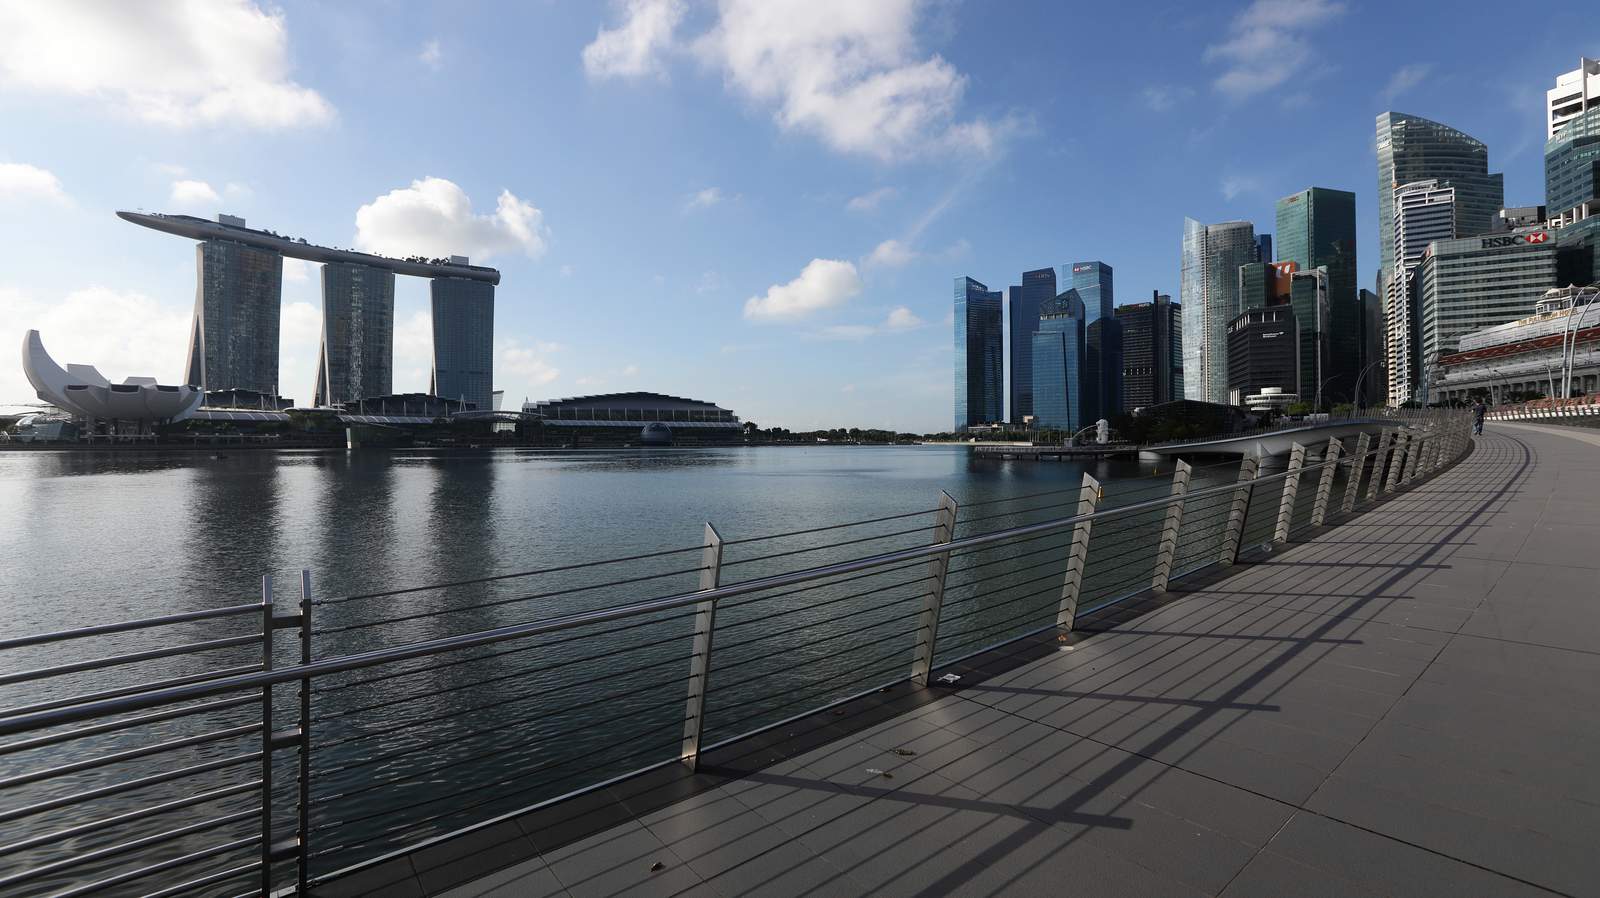 Singapore threatens 6 months in jail for breaking social distancing laws